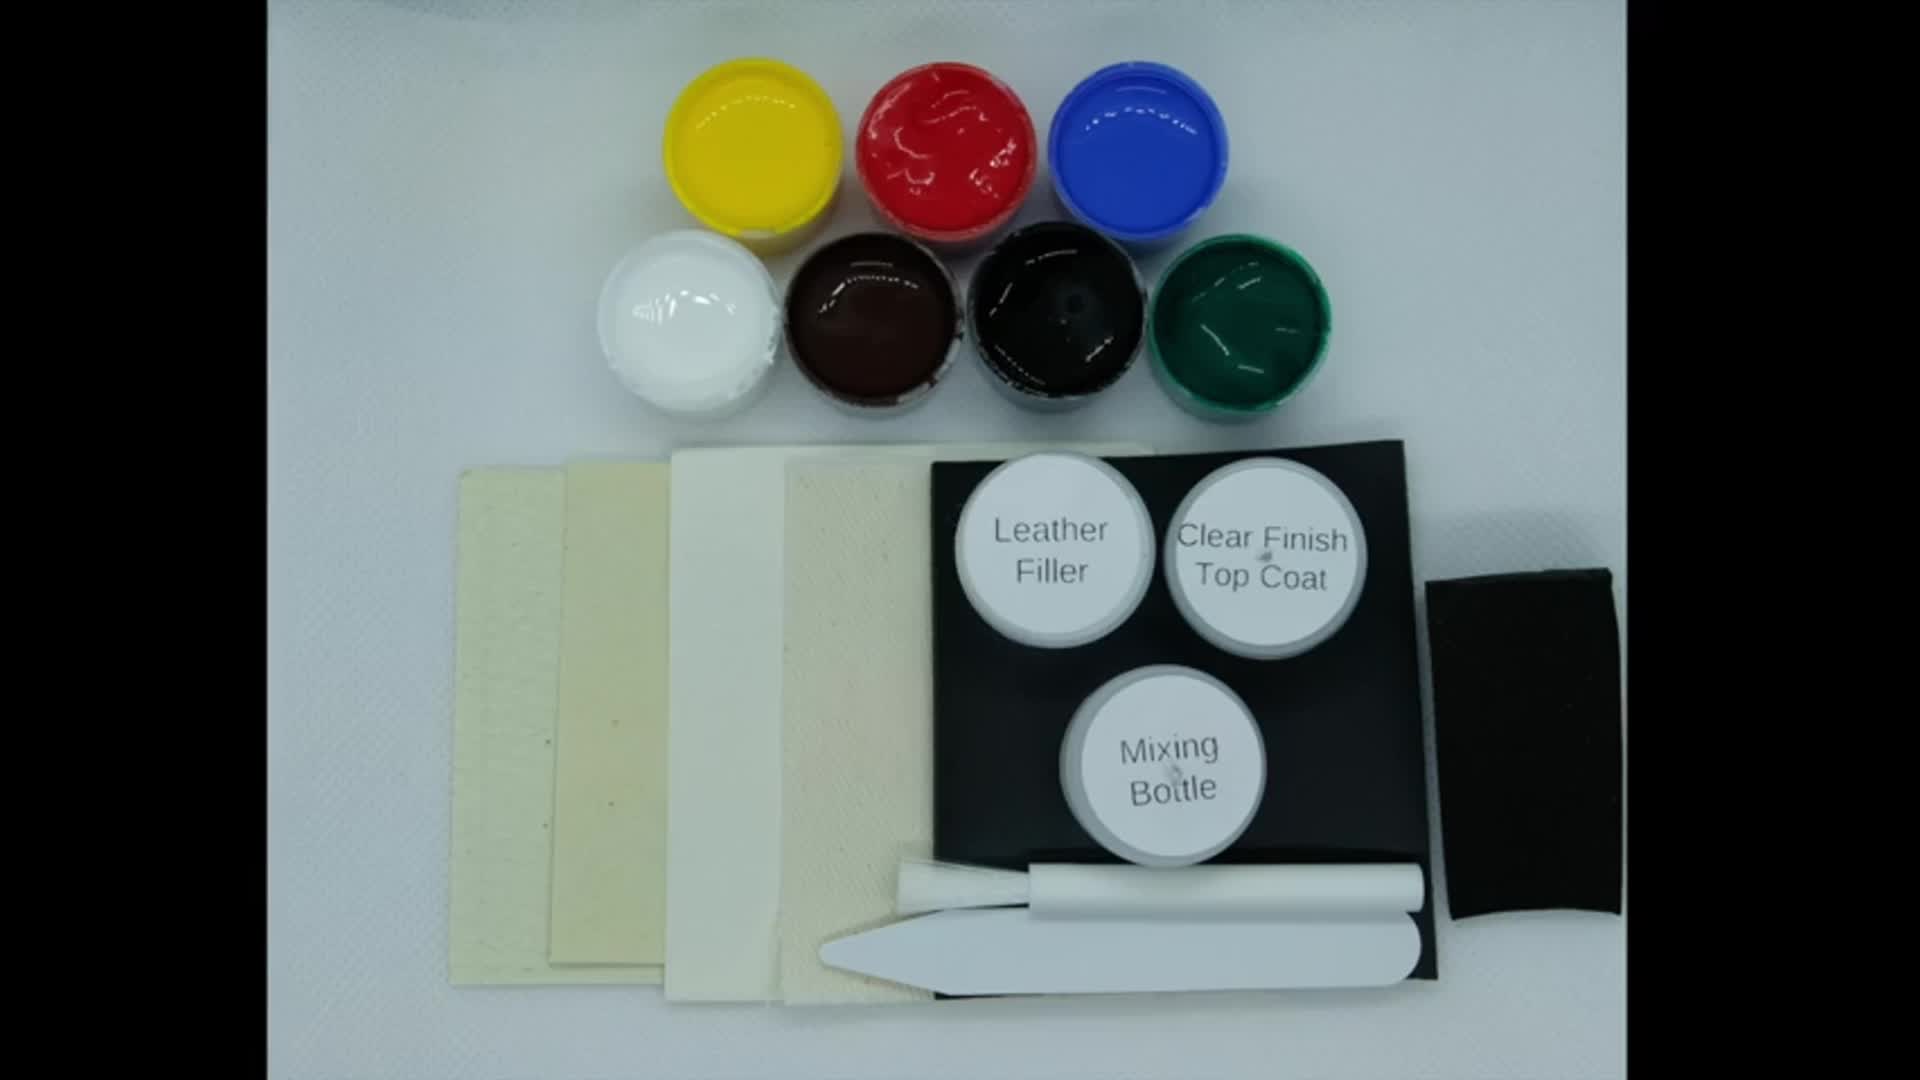 Auto Car Seat Repair Kit Liquid Skin Leather Vinyl Clock Repair Tools For  Scratch, Crack, And Rips, Including Coats, Holes, Cars, Sofas, Pools, And  More From Blake Online, $3.2